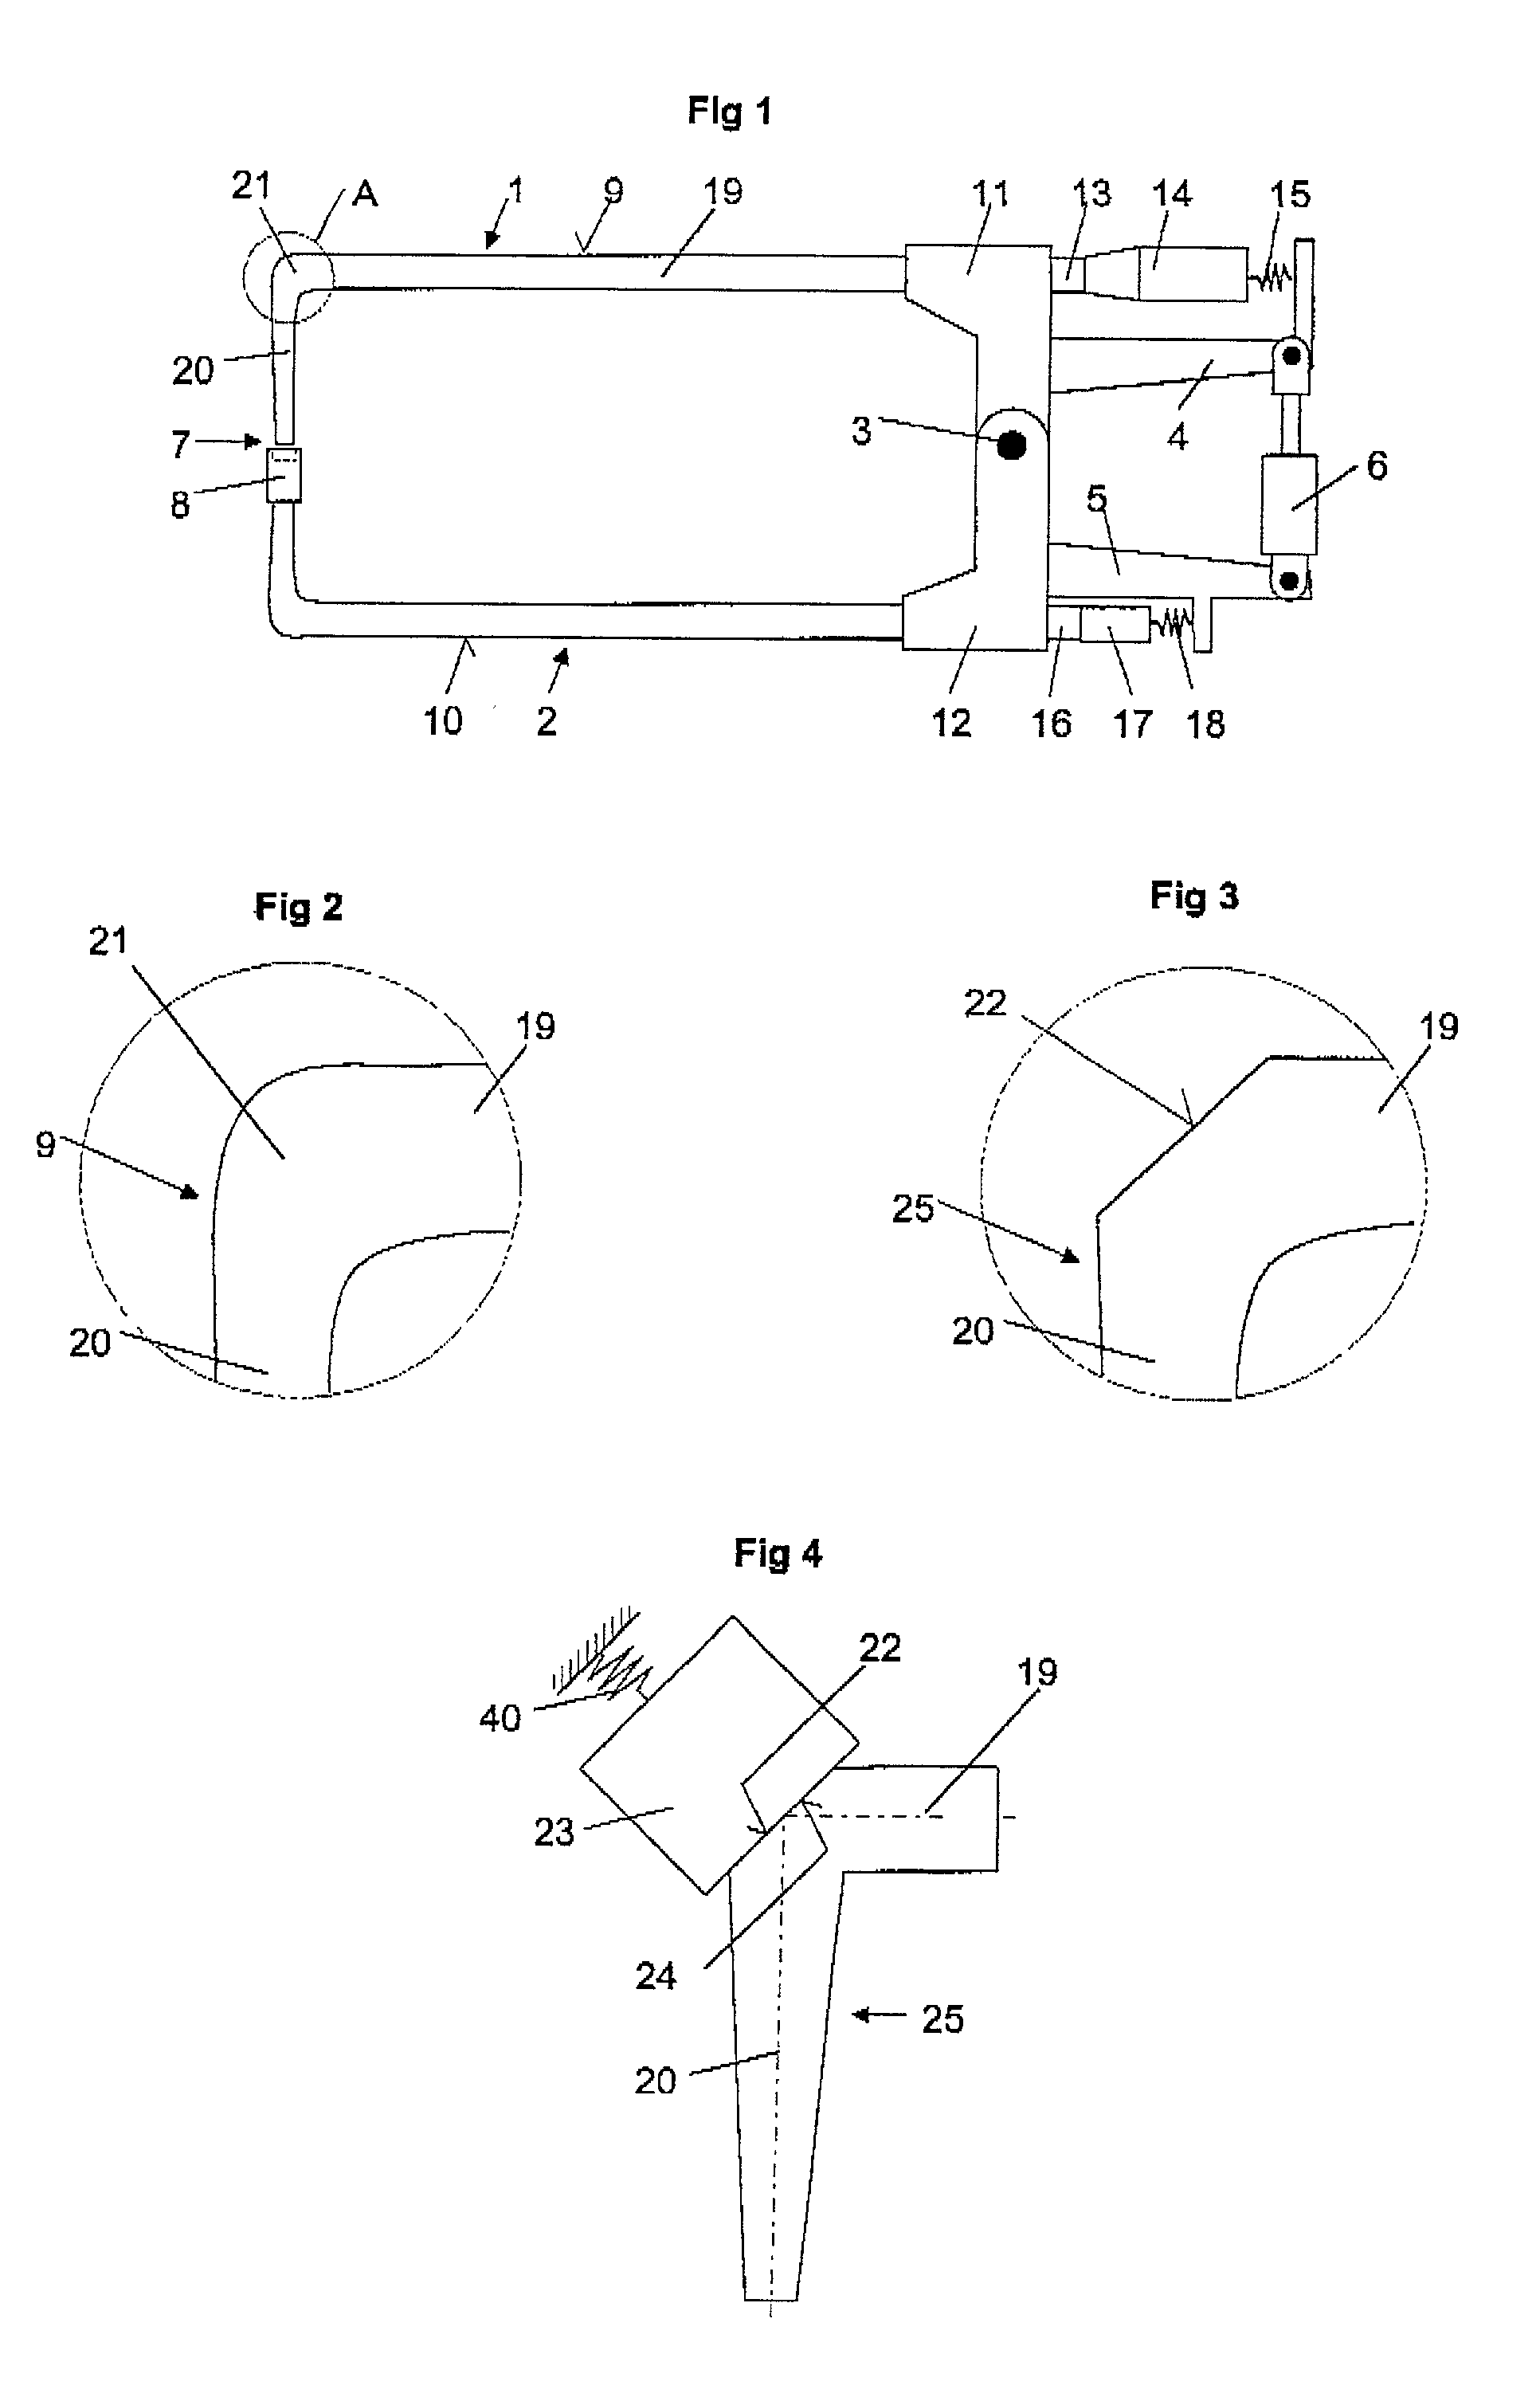 Process and apparatus for mechanically joining metallic components